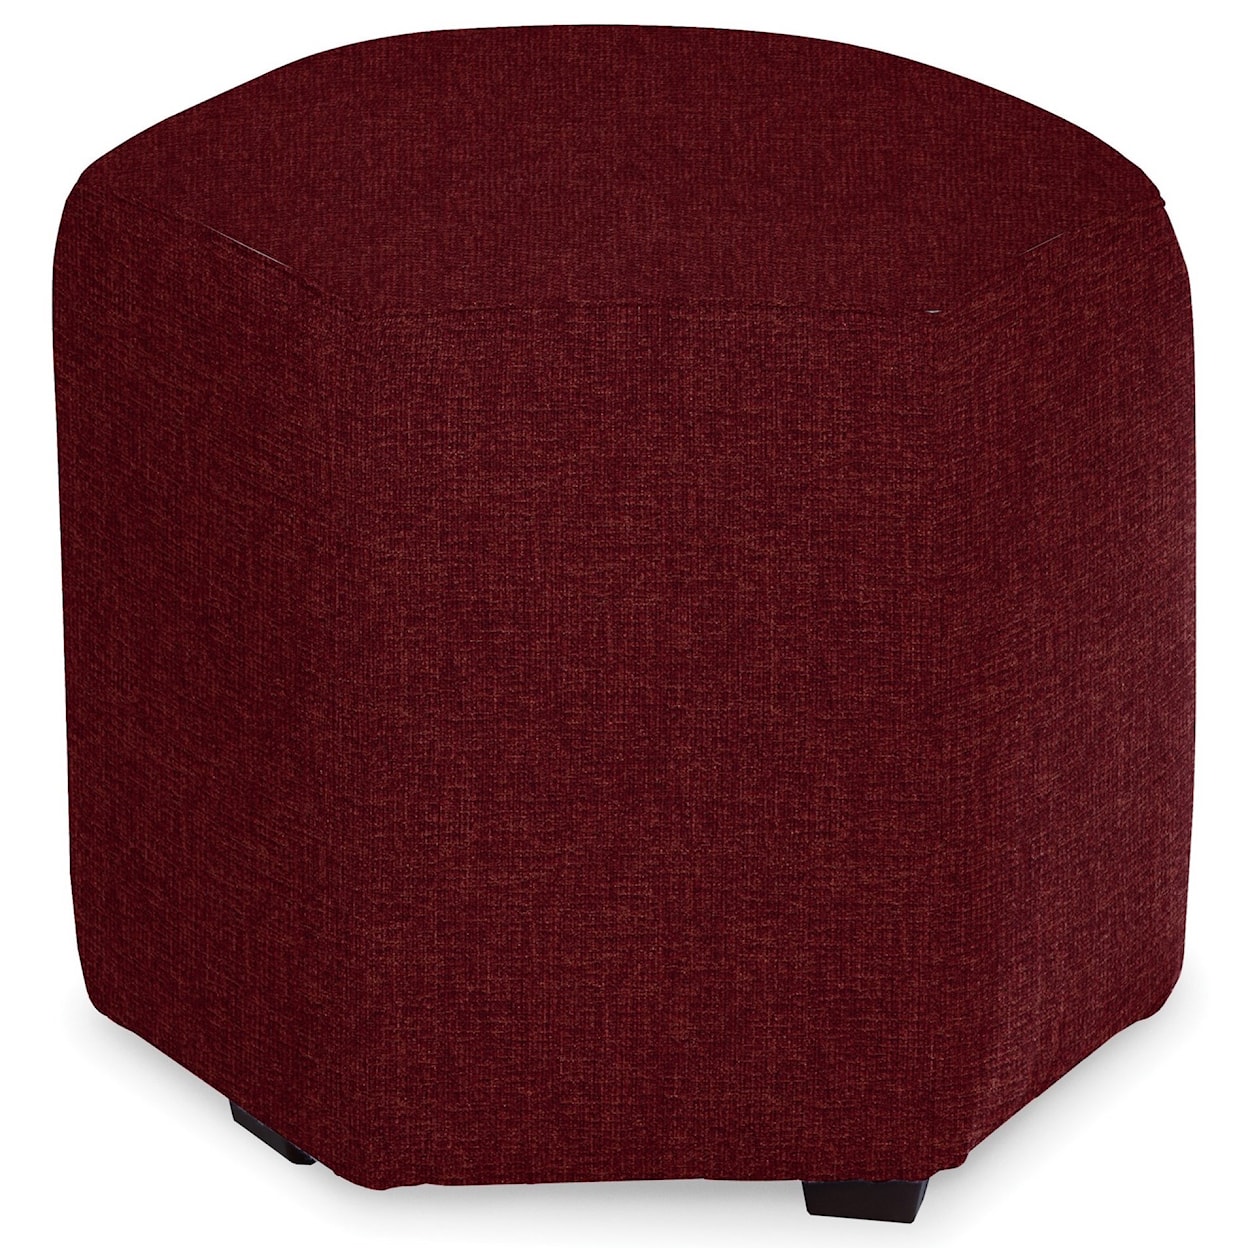 Hickory Craft 043200 Accent Ottoman